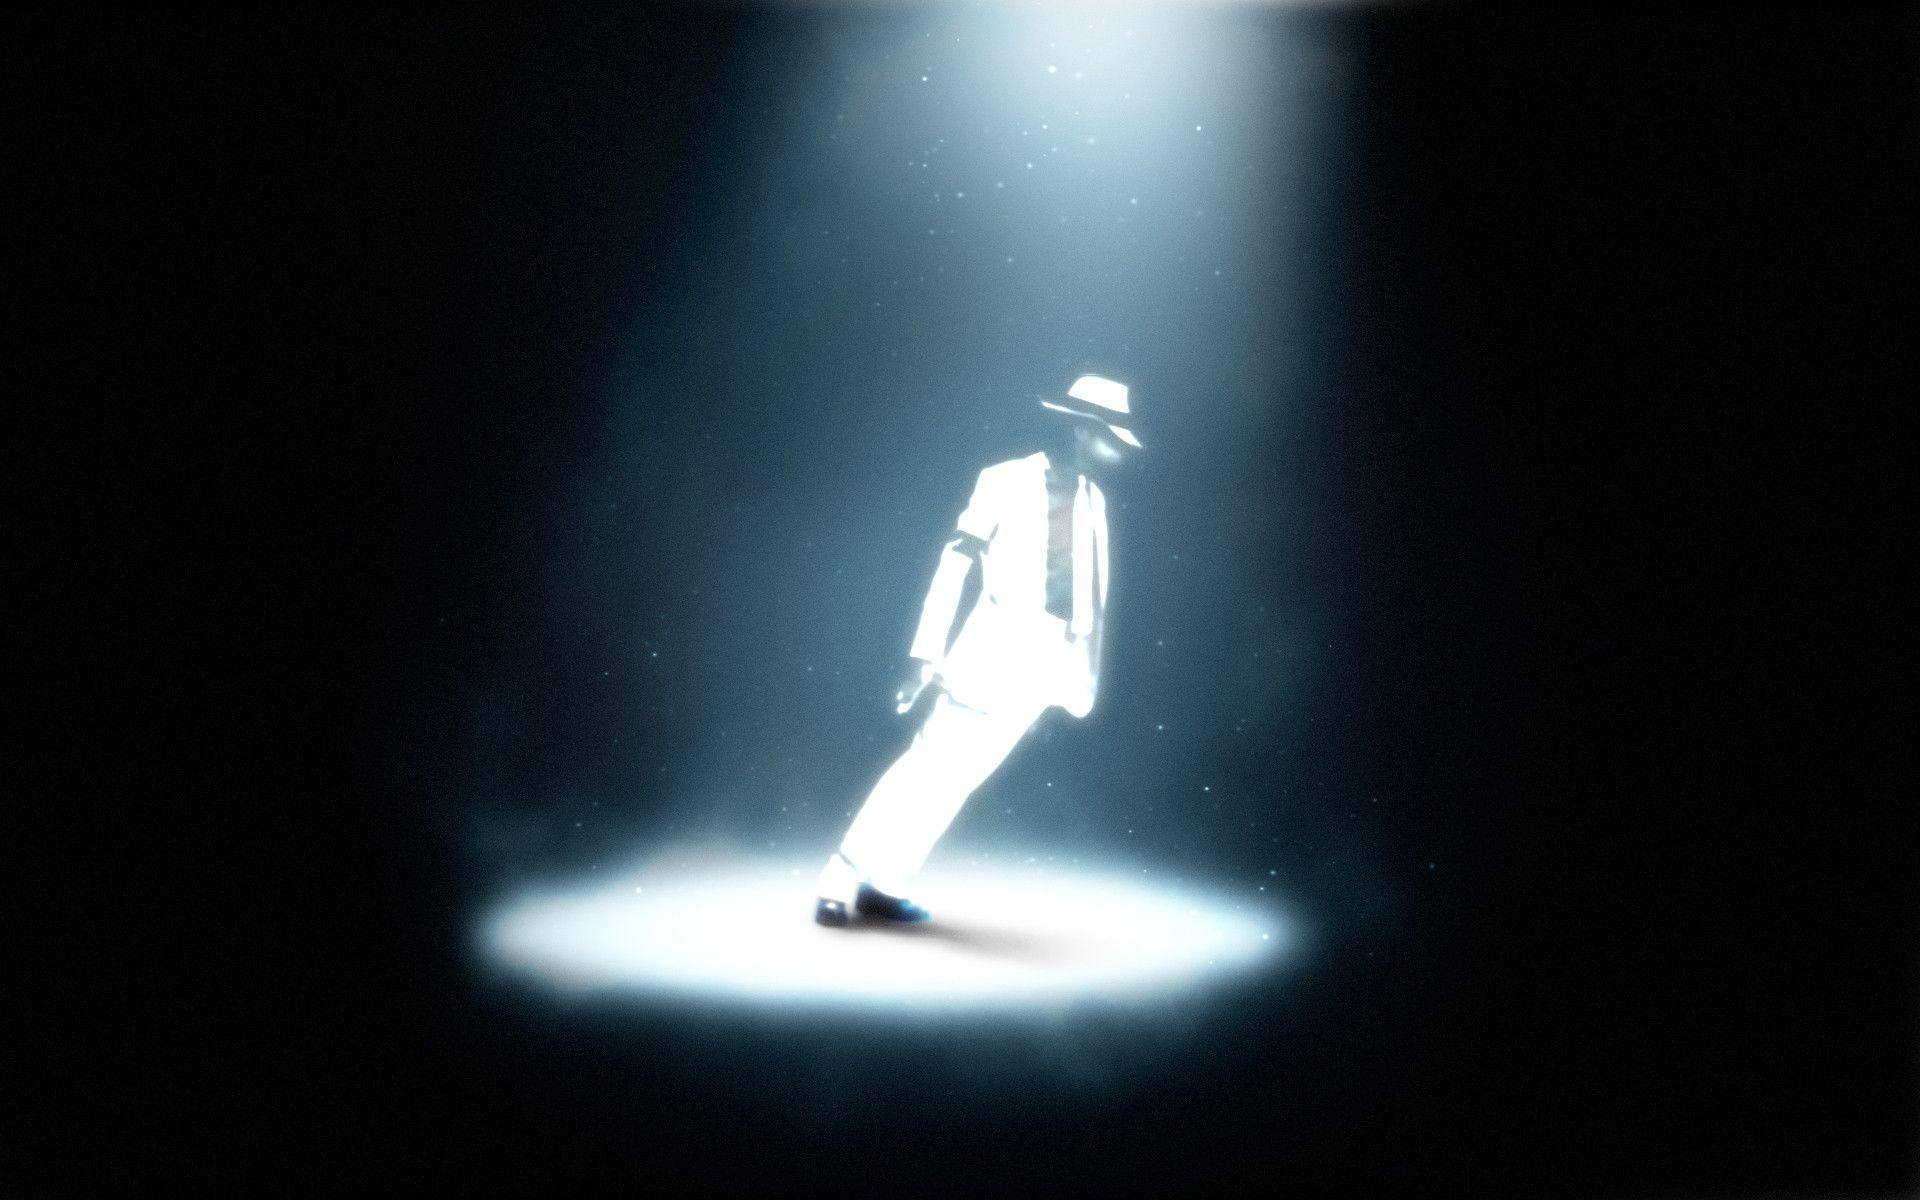 Who Invented The Moonwalk? Hint: It Wasn't Michael Jackson